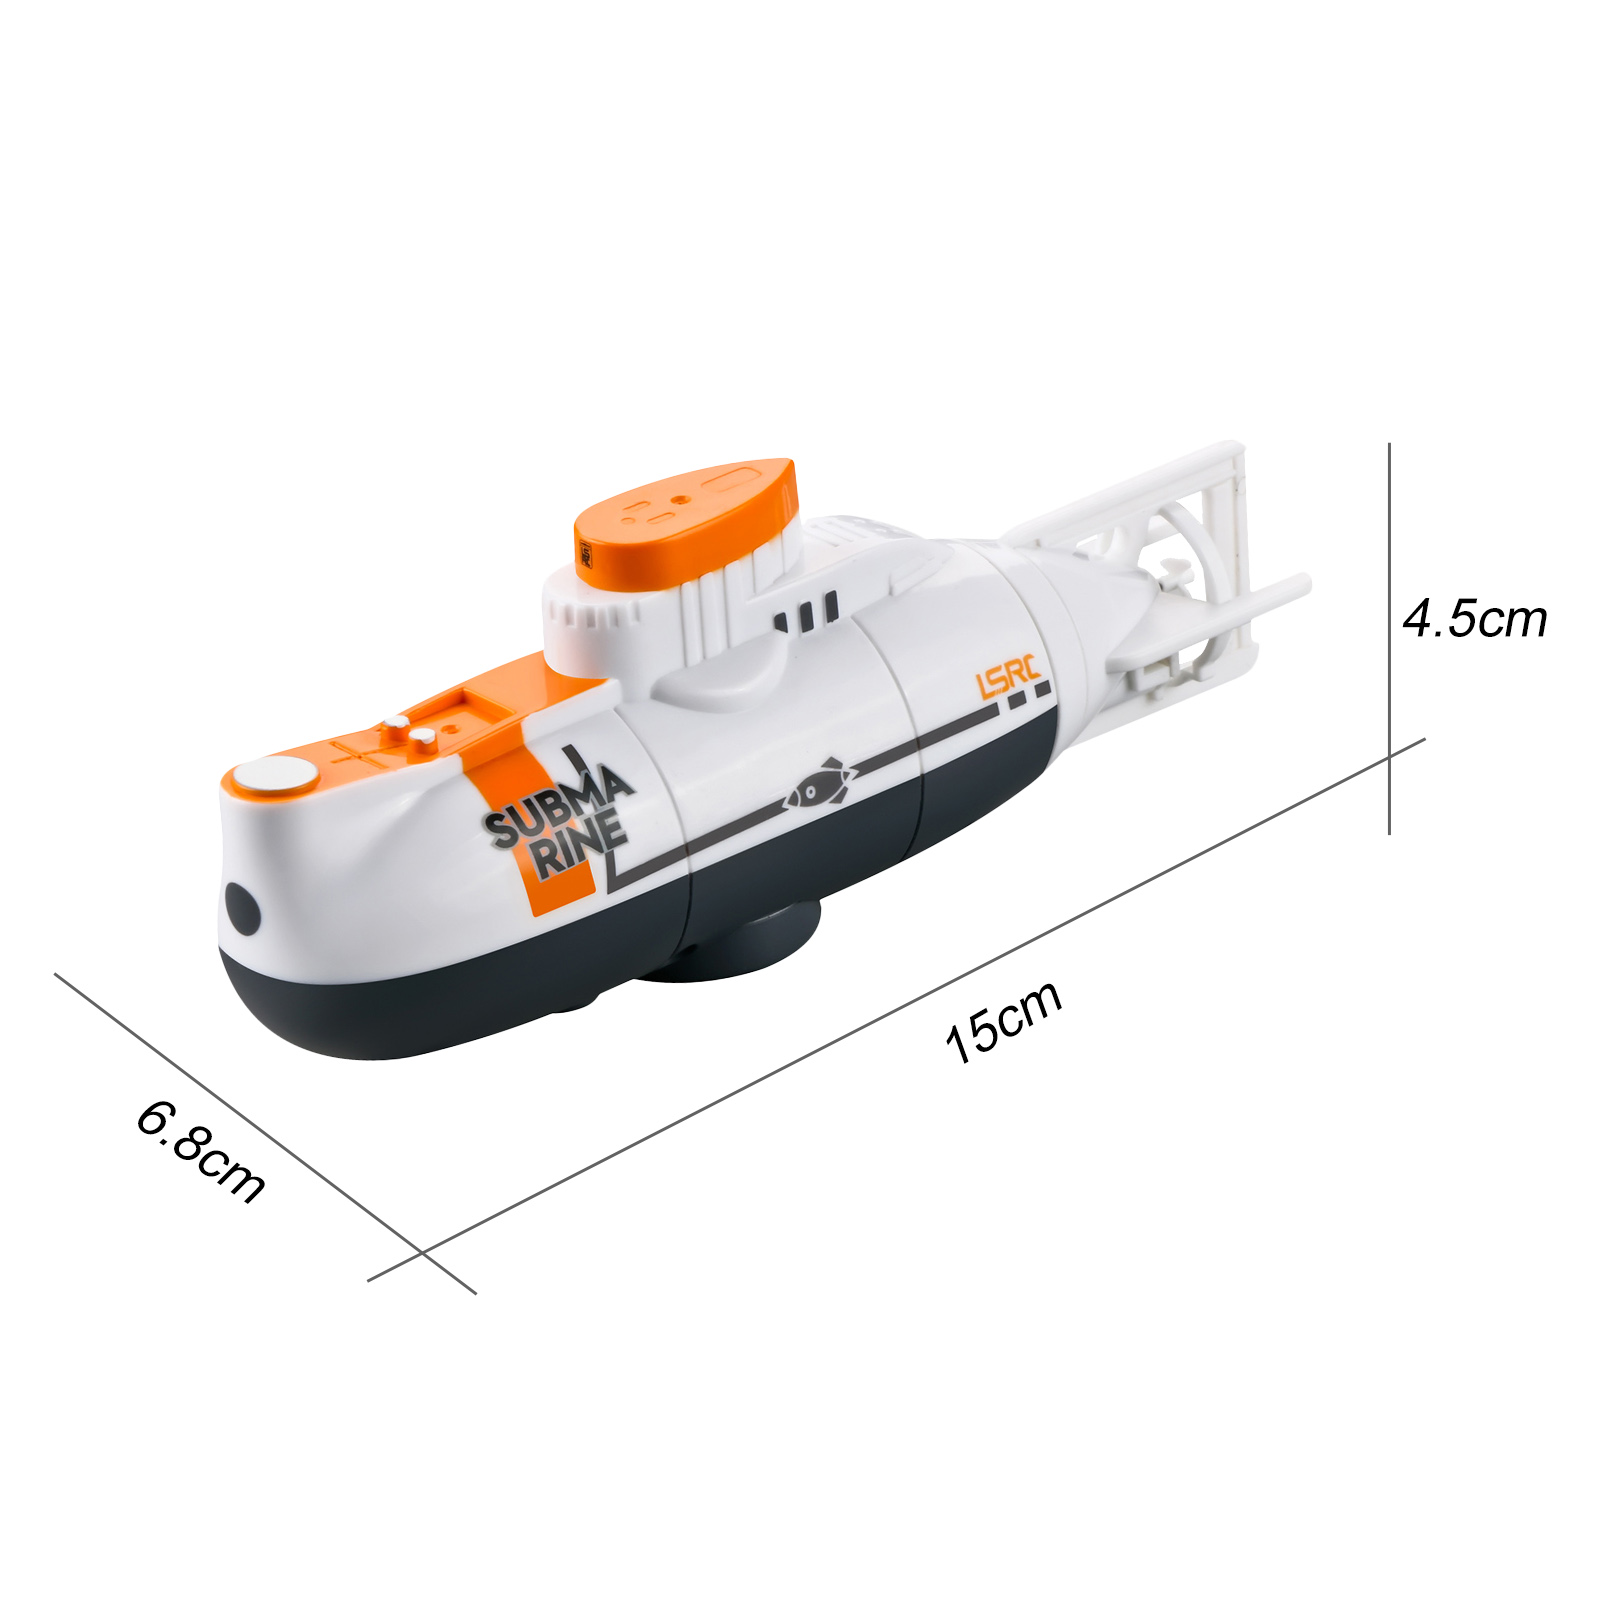 6 Channels Remote USB Charge Control Boat for Children Gifts Remote Control Submarine Boat Birthday Holiday Party Giftsnull:China,Type:white